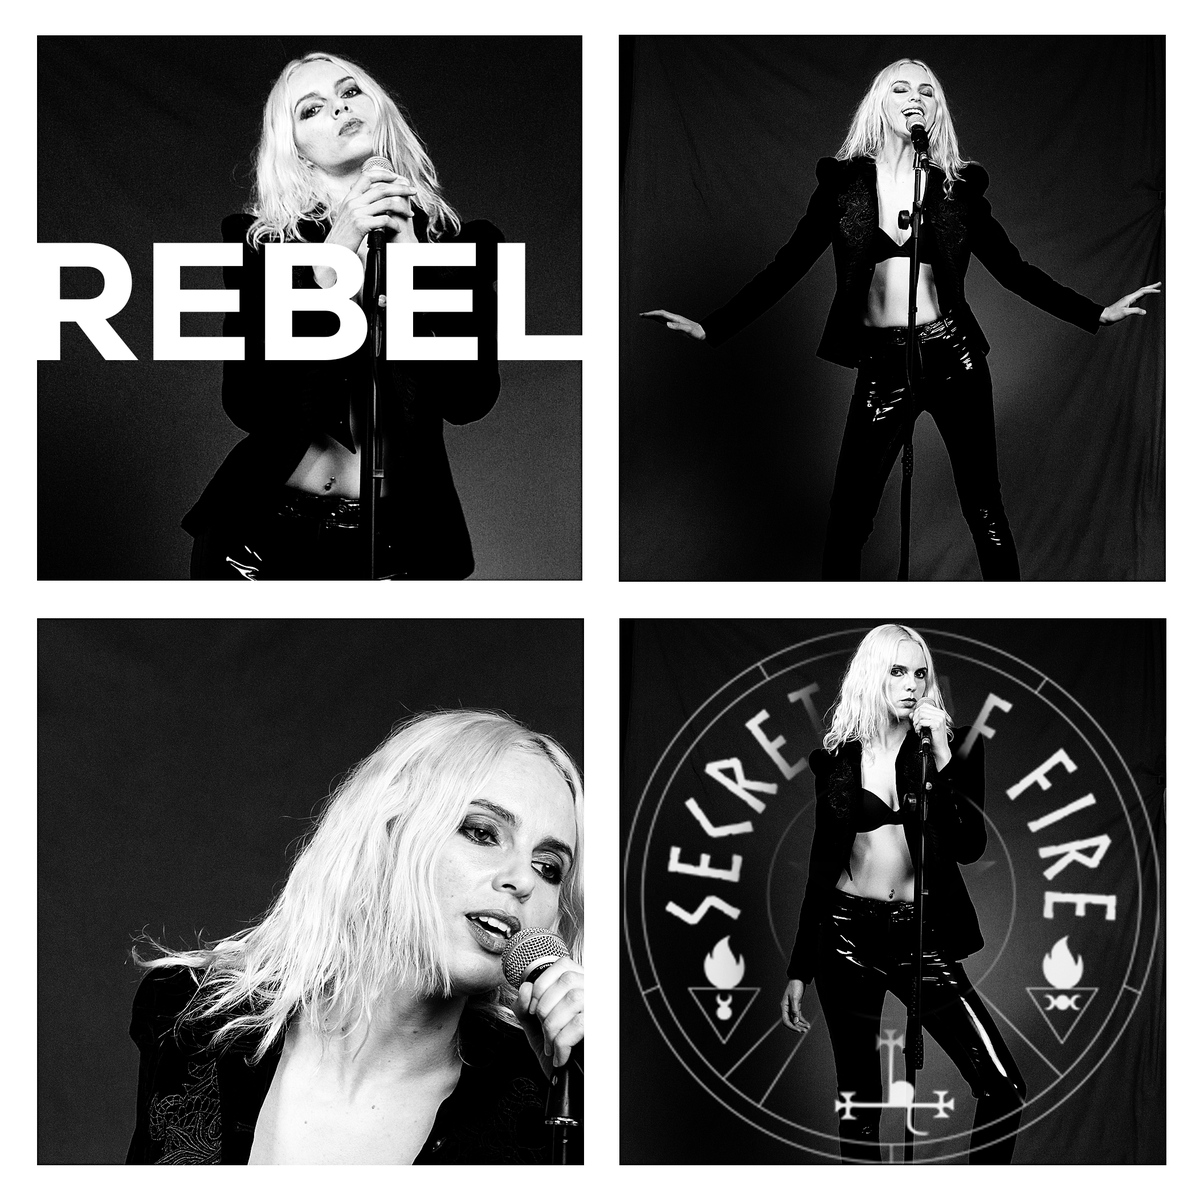 New Secrets Of Fire Single Rebel is Out Now! Stream on Spotify, download on Bandcamp, all links in bio #rebel #rebelde #indie #rock #gothic #witchrock #uk #guitarband #witchpop #secretsoffire #sof #newmusic